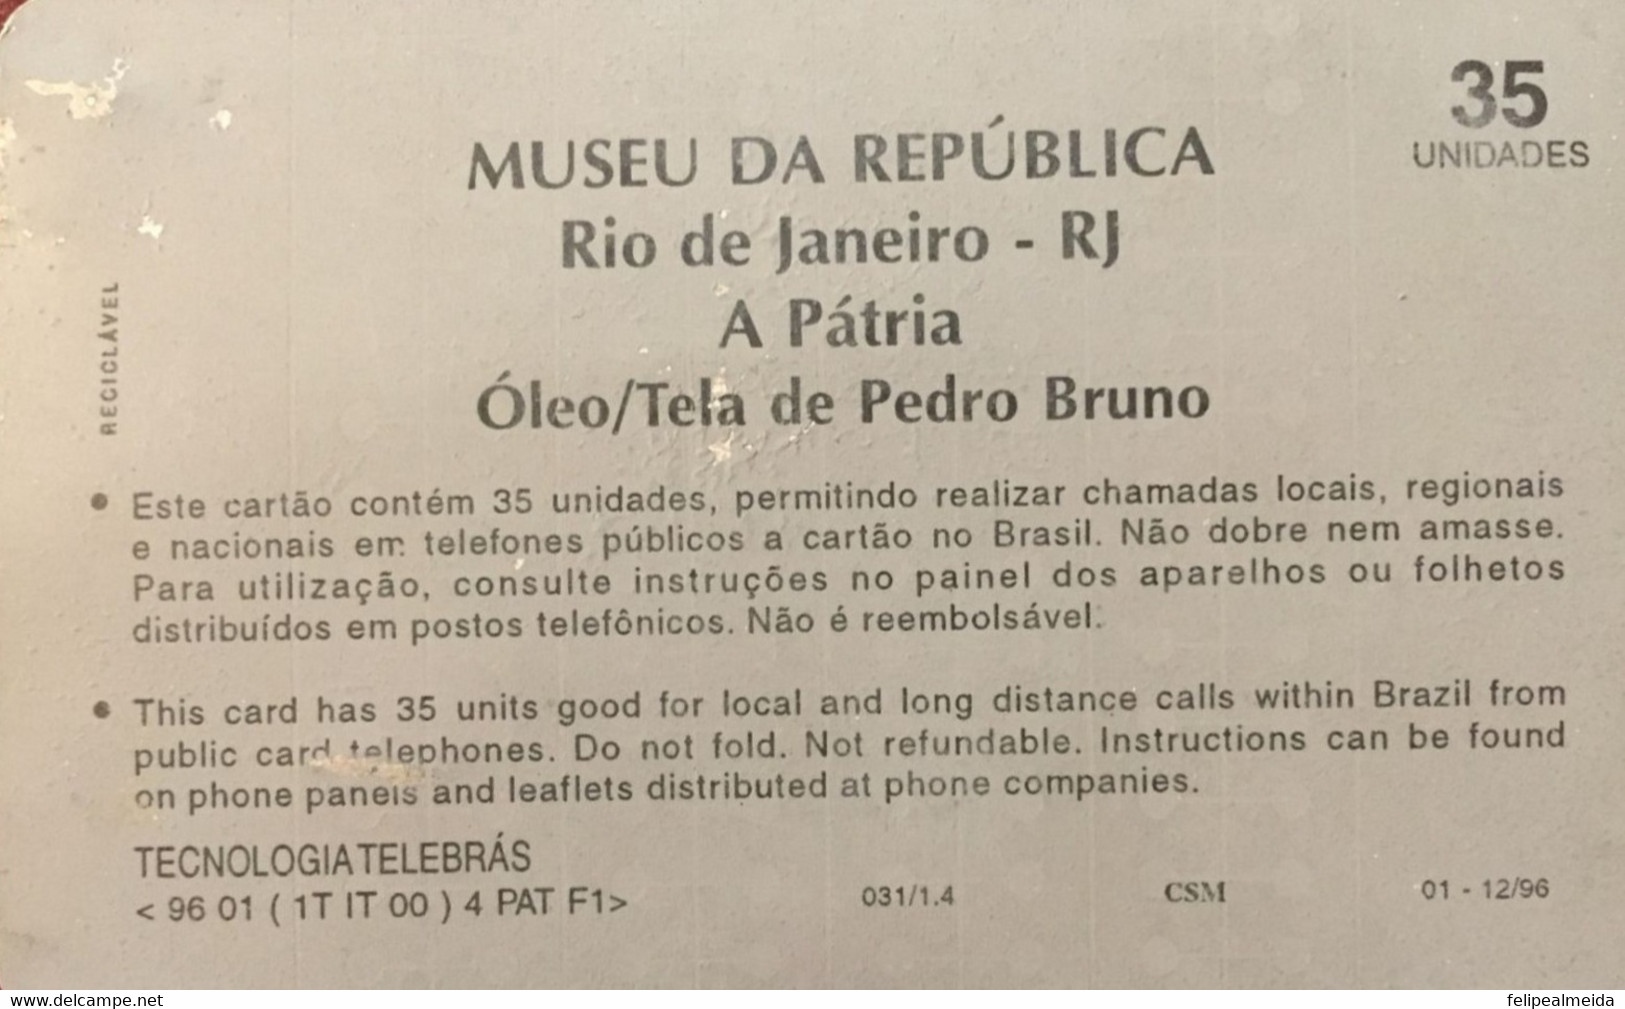 Phone Card Manufactured By Telebras In 1996 - Series Museums - Painting A Pátria - Painter Pedro Bruno - Exhibited At Th - Malerei